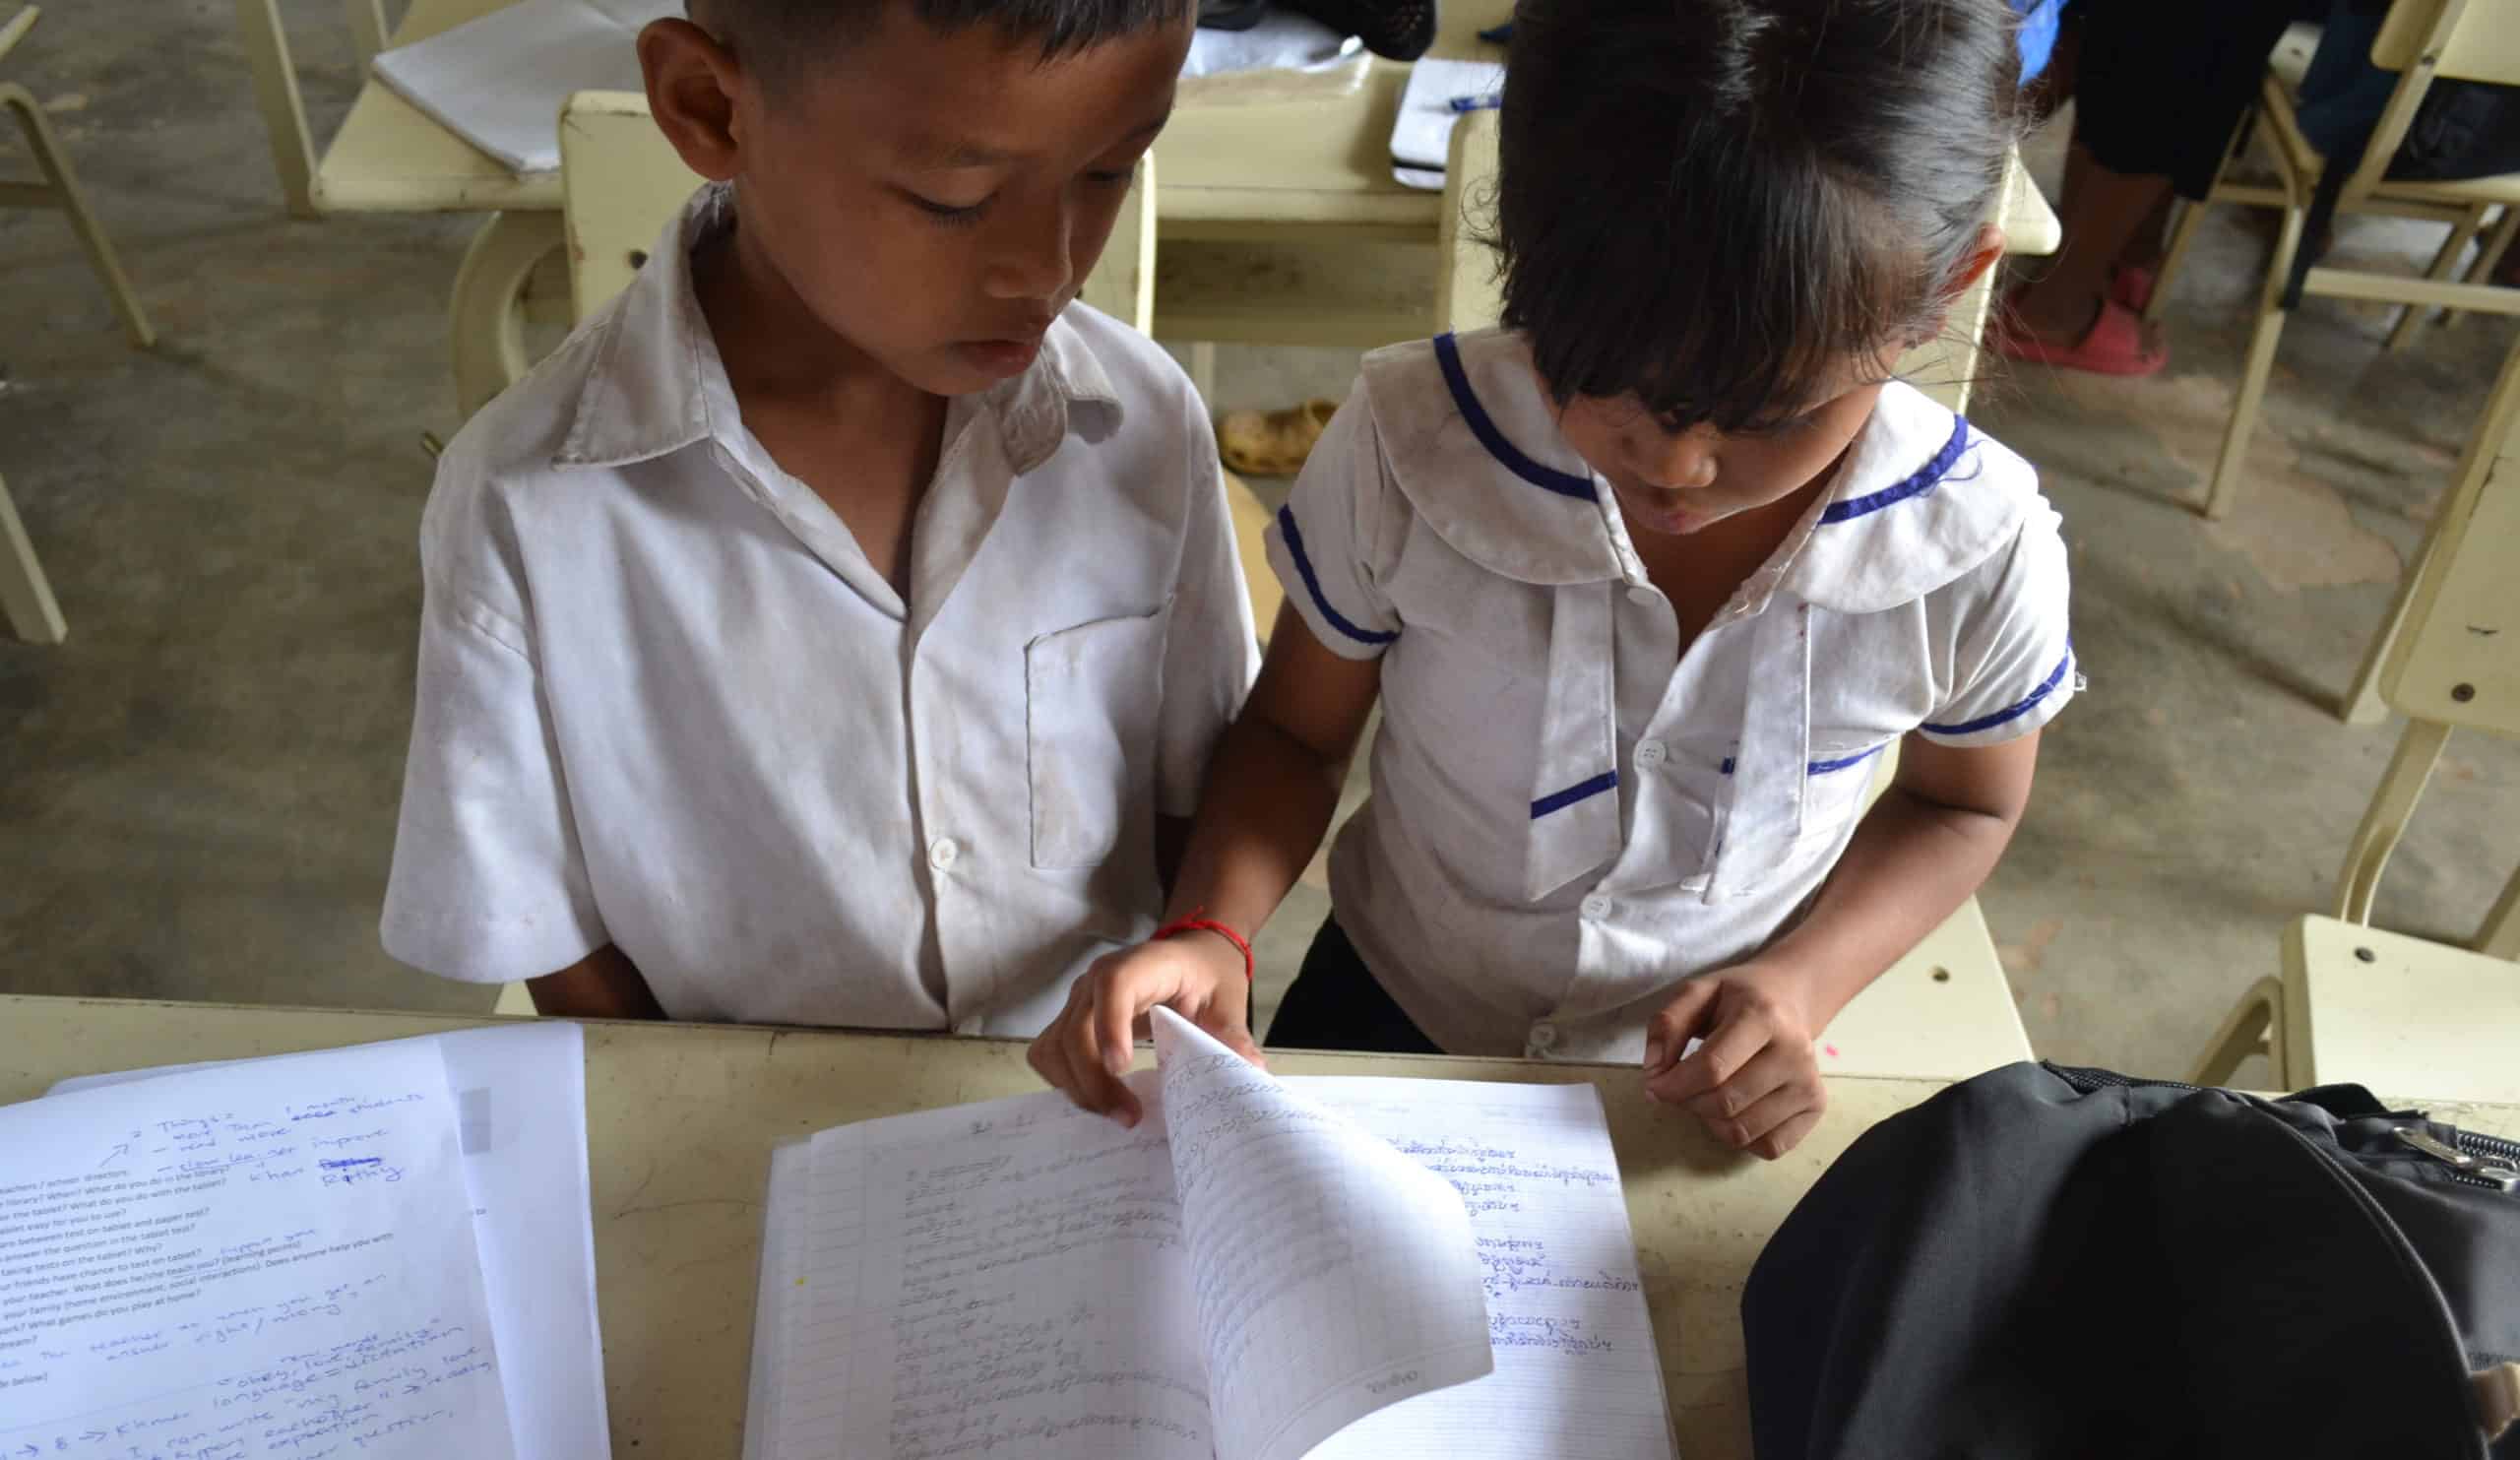 Two Cambodian school children look over their notes from class while sitting at a desk.